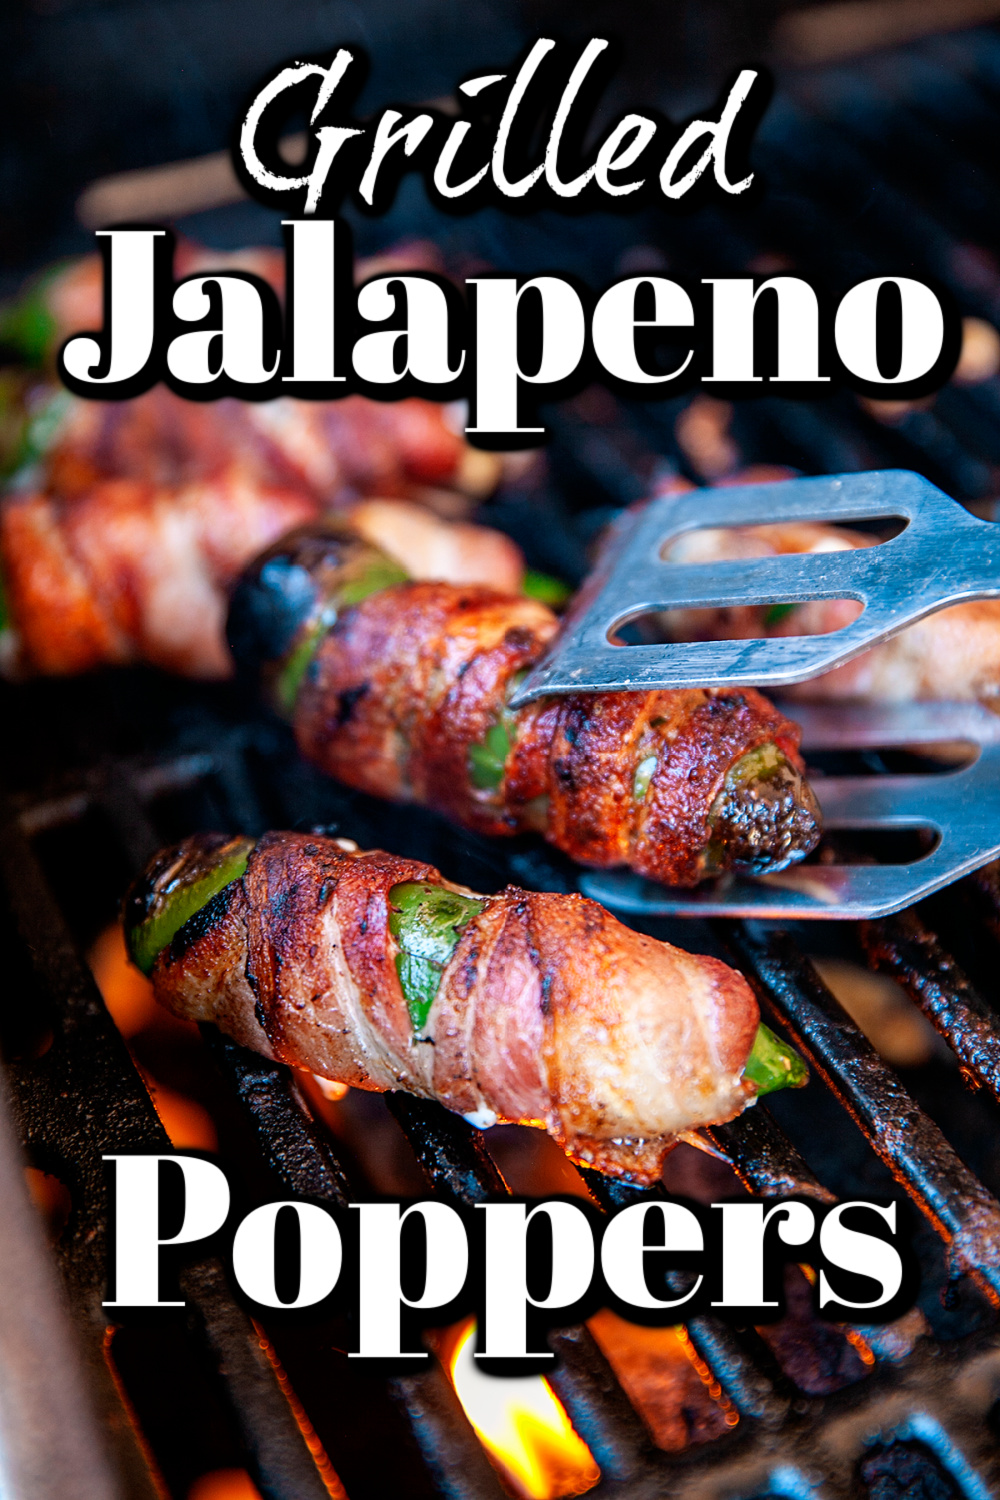 Grilled jalapeno poppers filled with cream cheese and wrapped in bacon! These little bites will disappear quickly; better make a double batch!